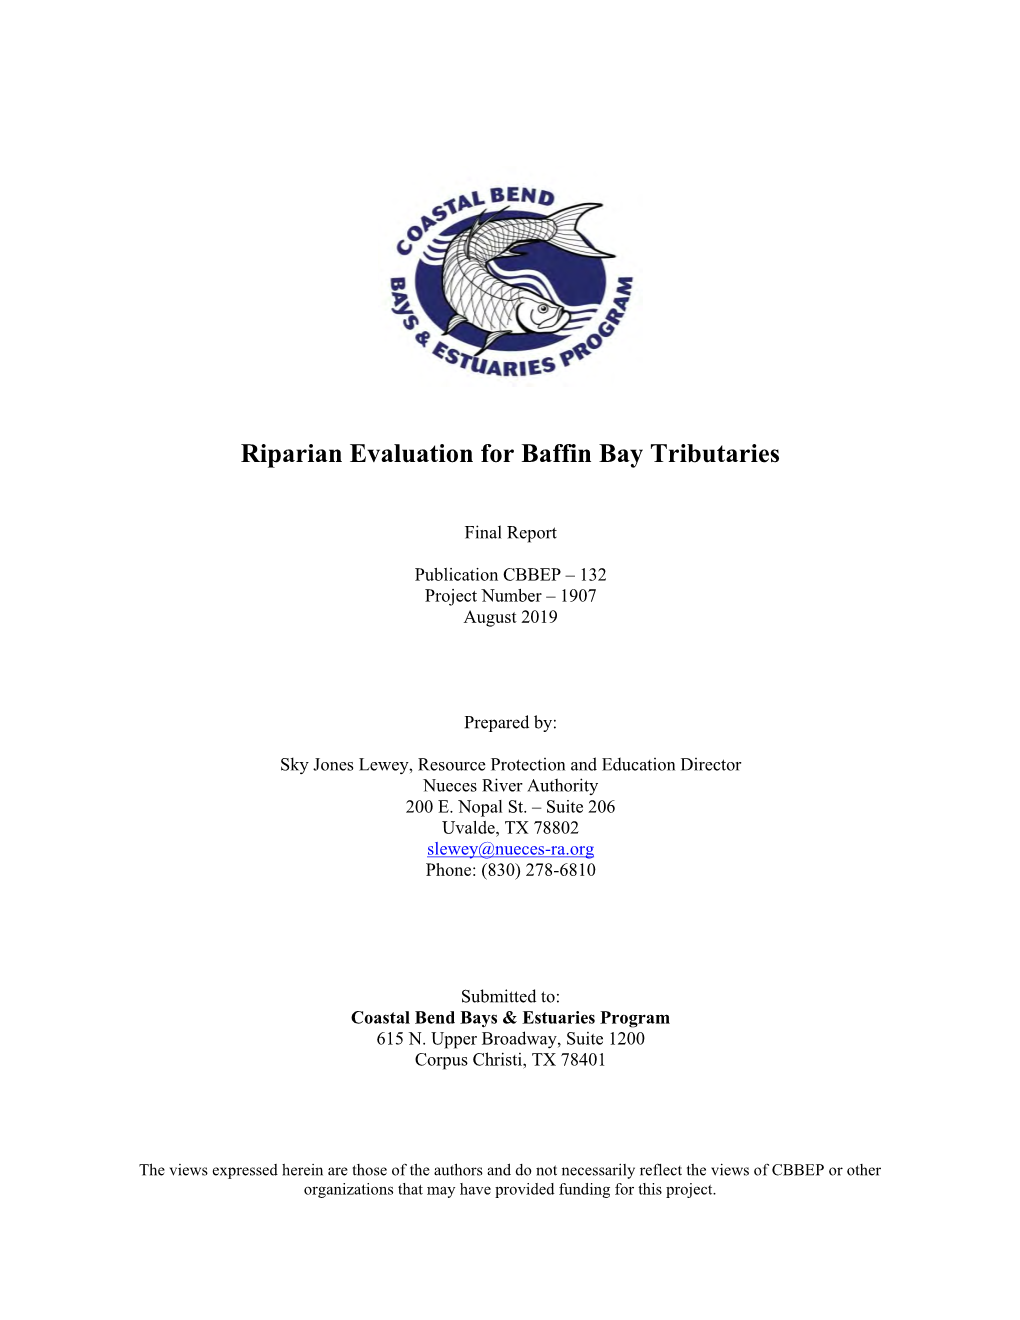 Riparian Evaluation for Baffin Bay Tributaries